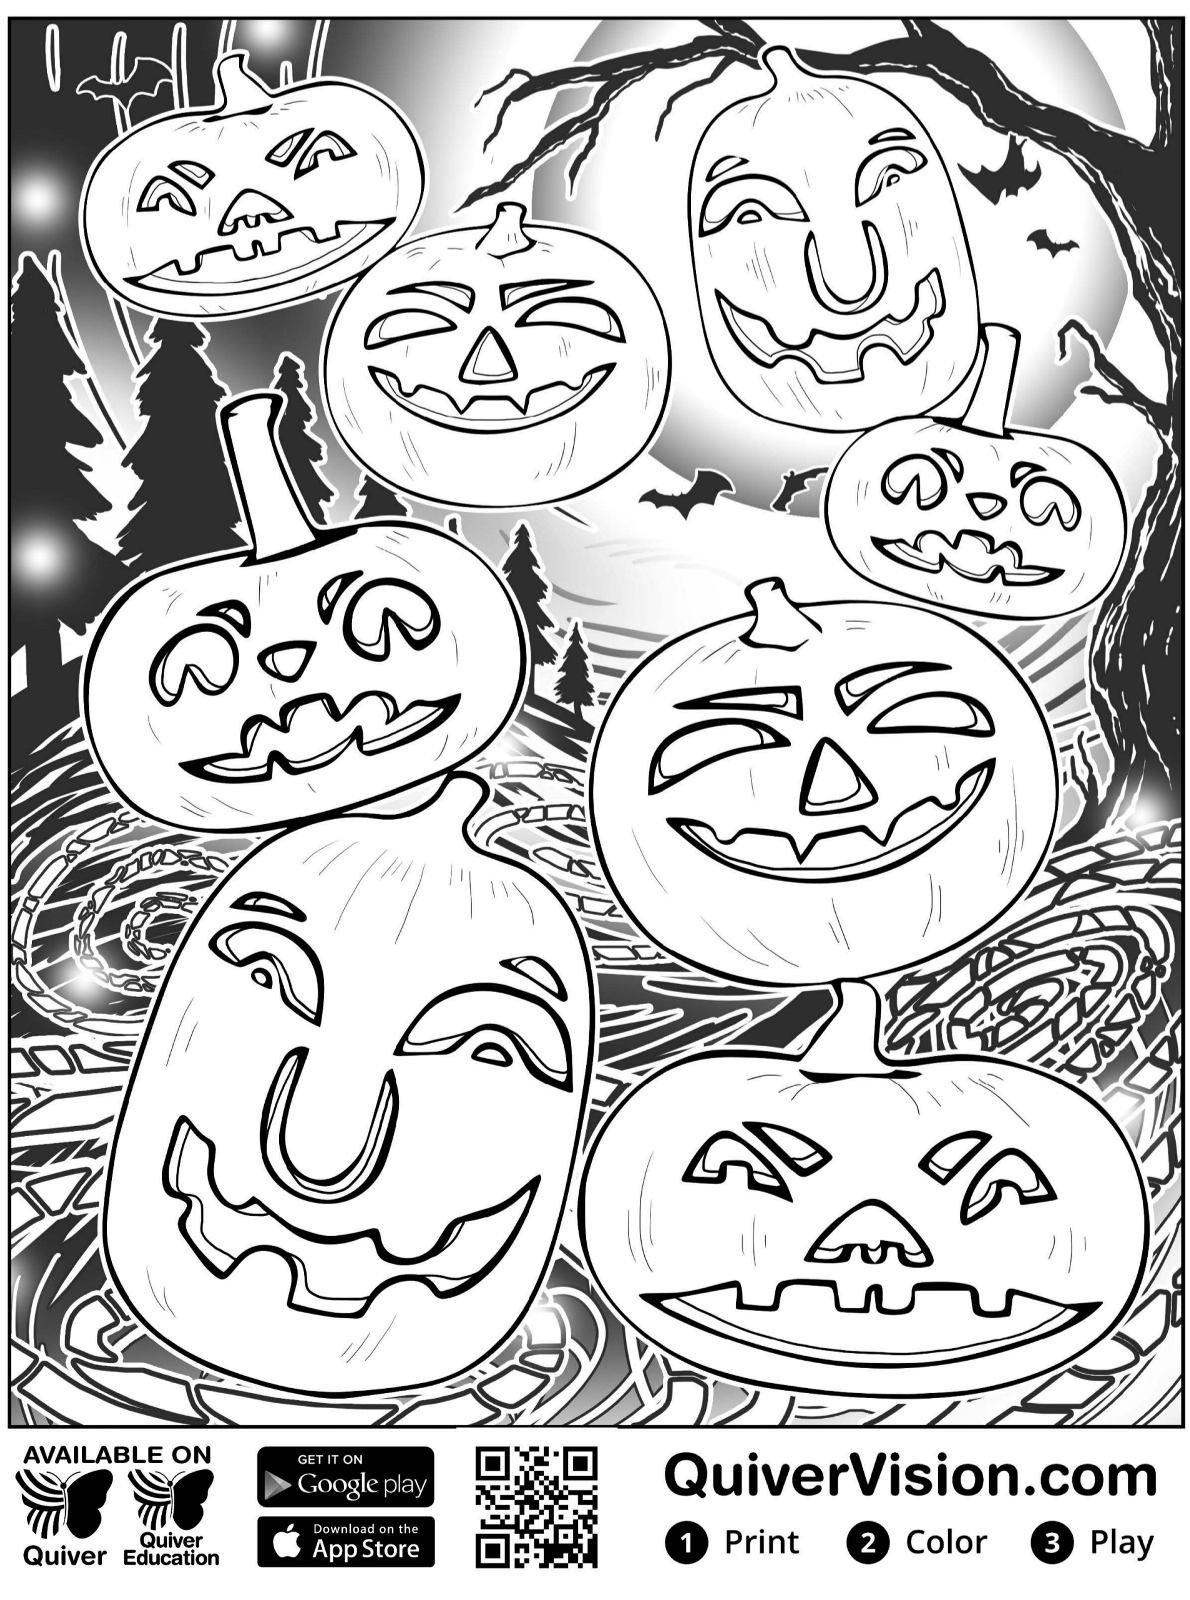 Kids-n-fun.com | Coloring page Quiver halloween